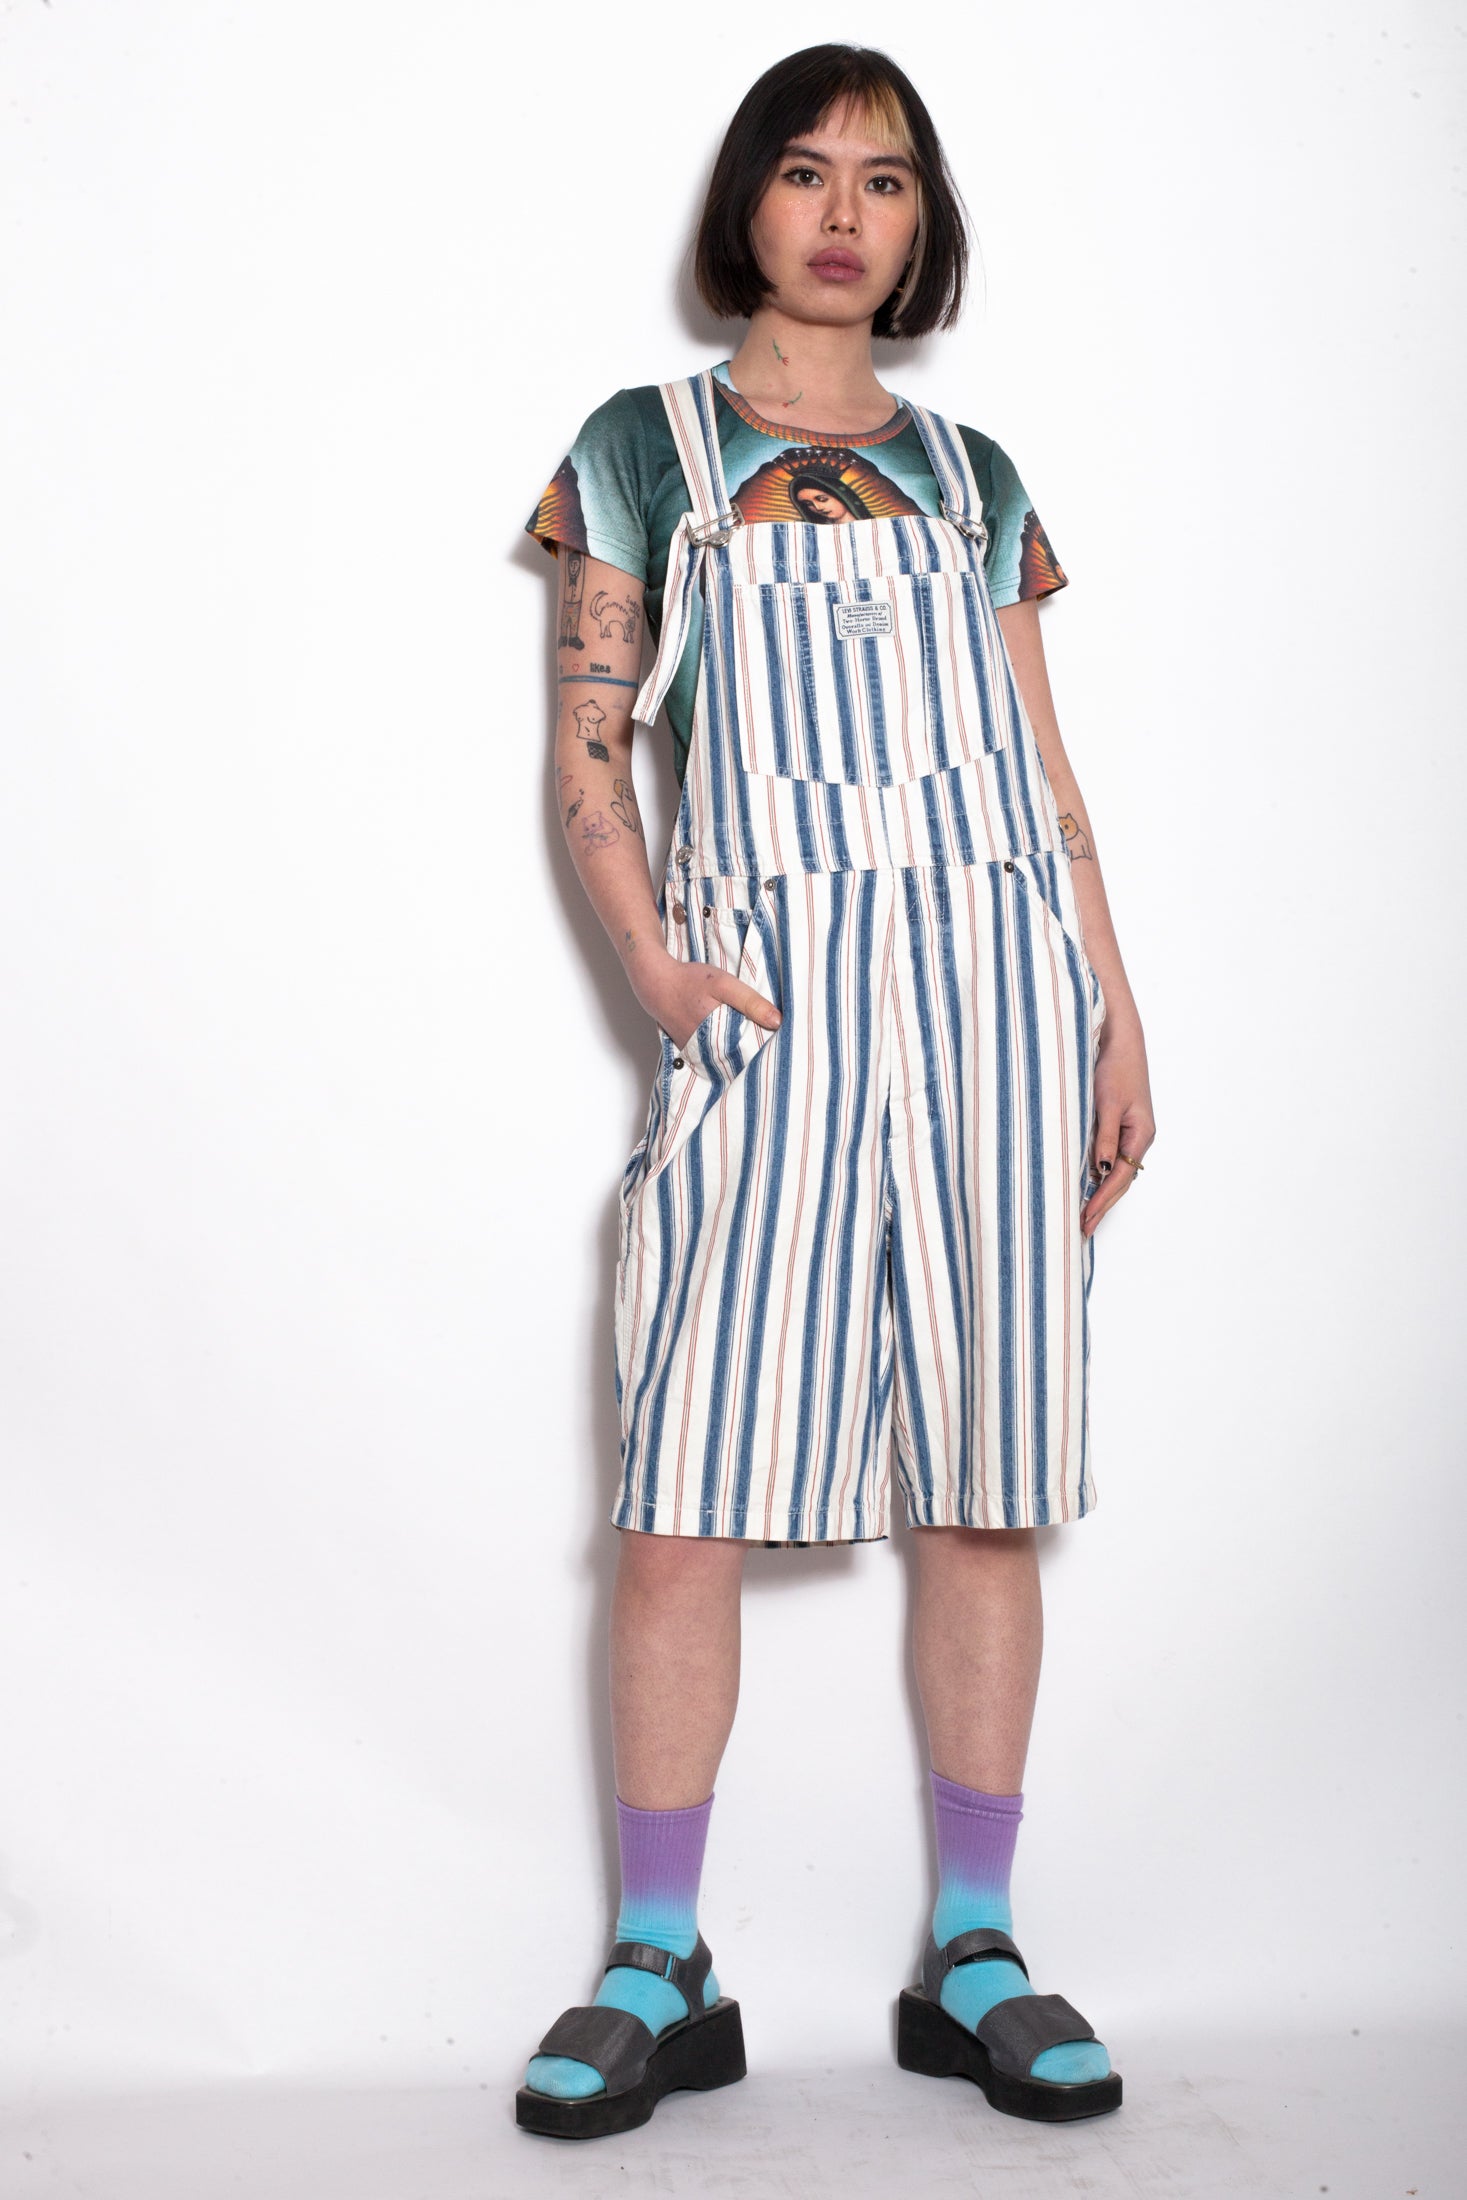 Vintage Levi's Striped Short Dungarees – Not Too Sweet